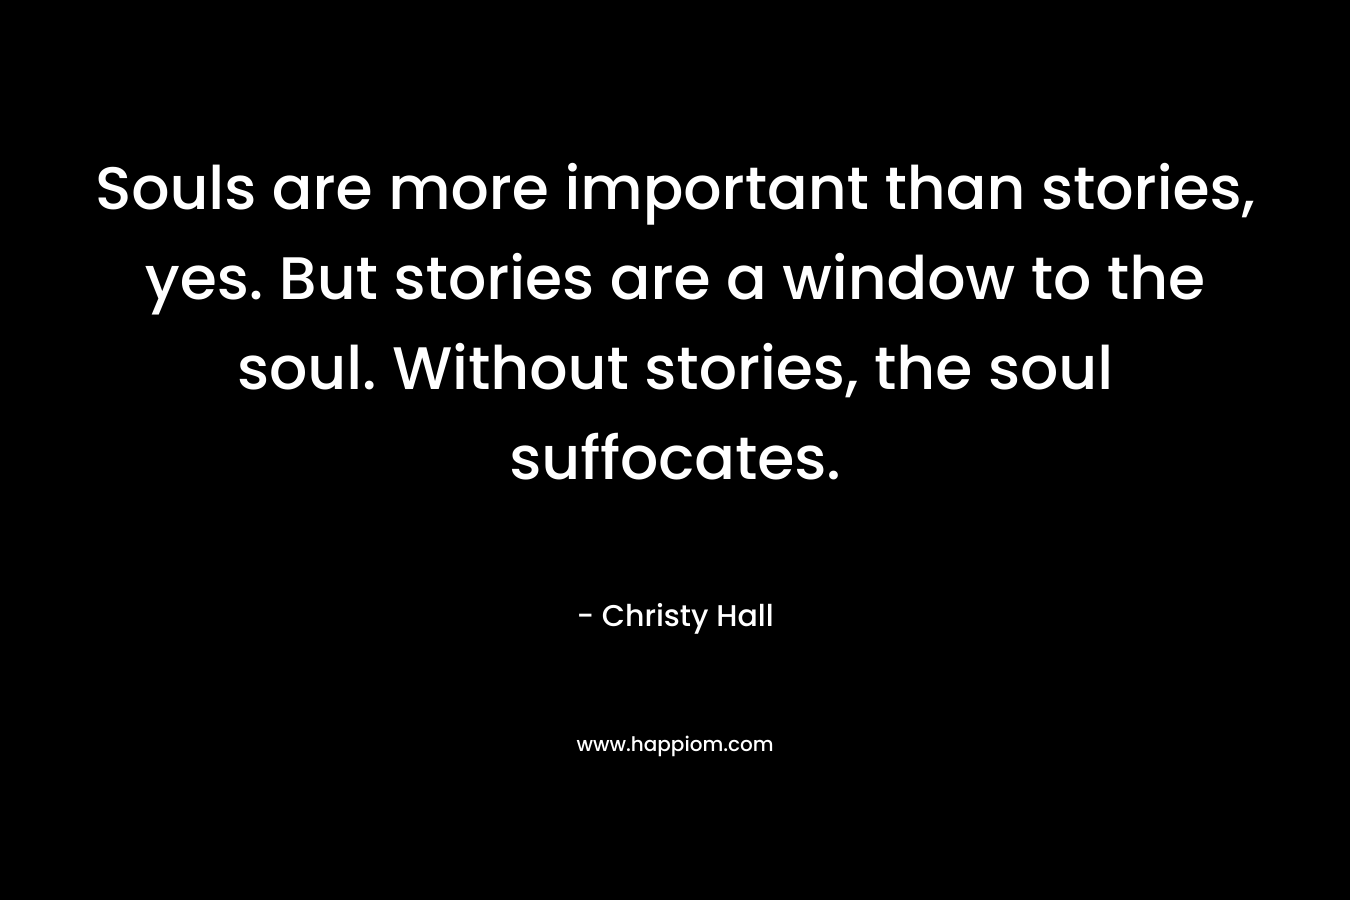 Souls are more important than stories, yes. But stories are a window to the soul. Without stories, the soul suffocates. – Christy  Hall